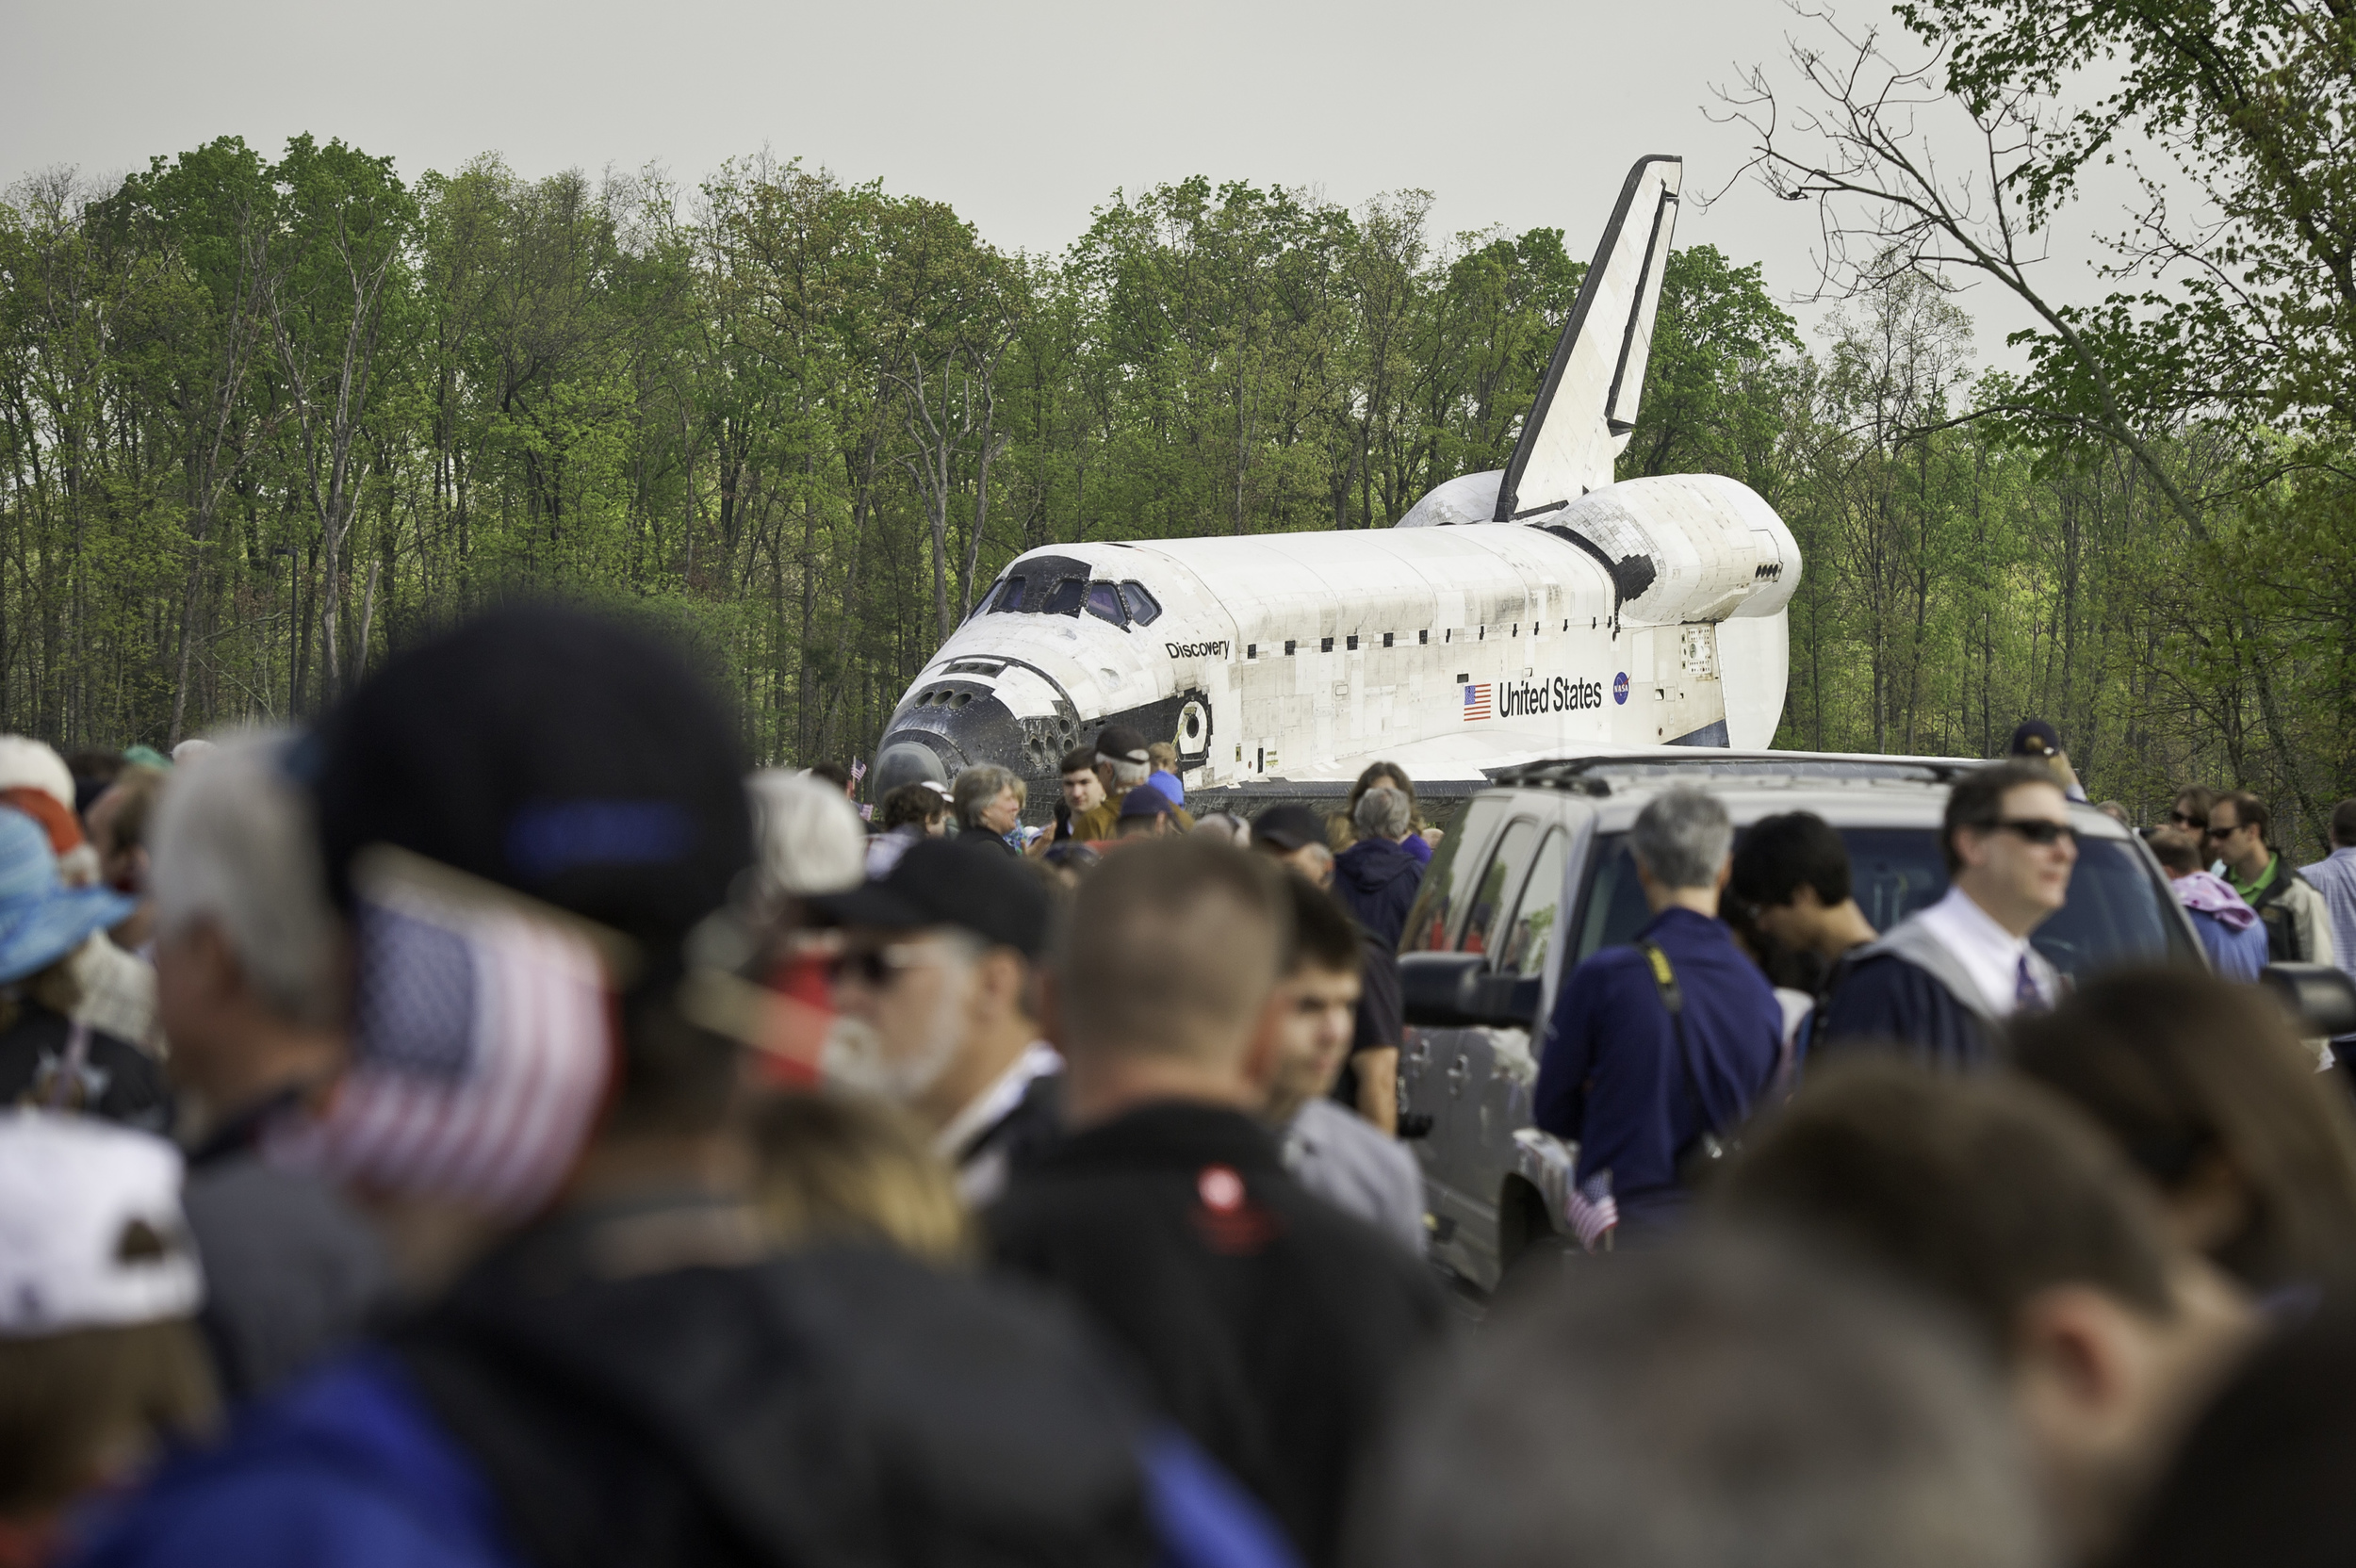  Space shuttle Discovery is rolled toward the transfer ceremony at the Steven F. Udvar-Hazy Center Thursday, April 19, 2012 in Chantilly, Va. Discovery will be permanently housed at the Udvar-Hazy Center, part of the Smithsonian Institution’s Air and